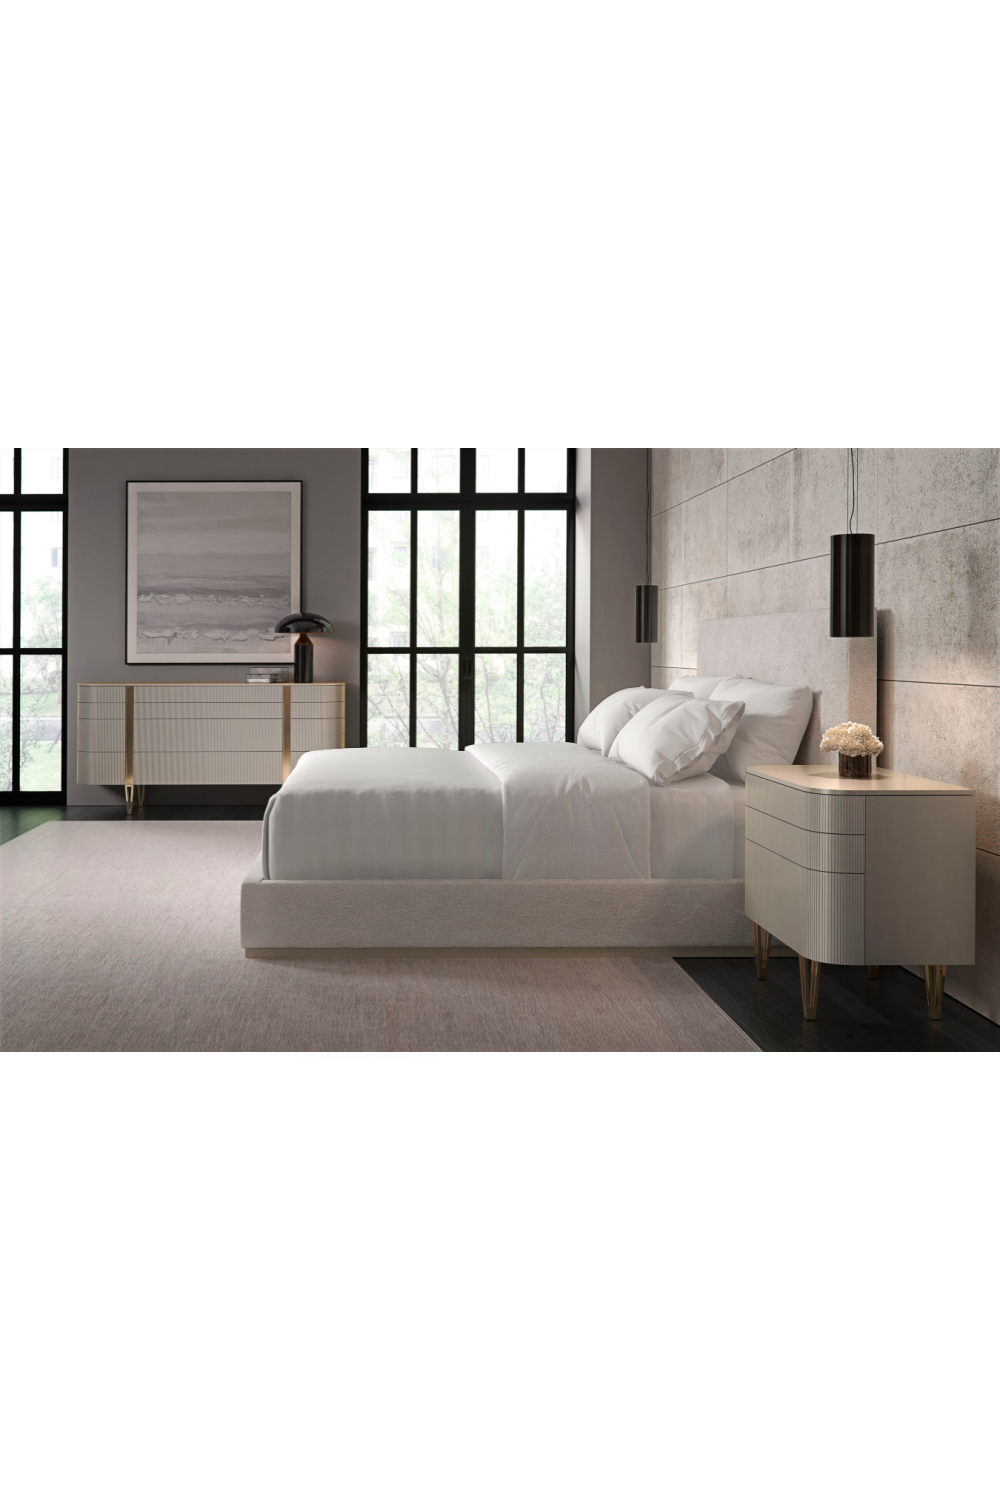 Cream Upholstered King Bed | Caracole Boutique | Oroa.com